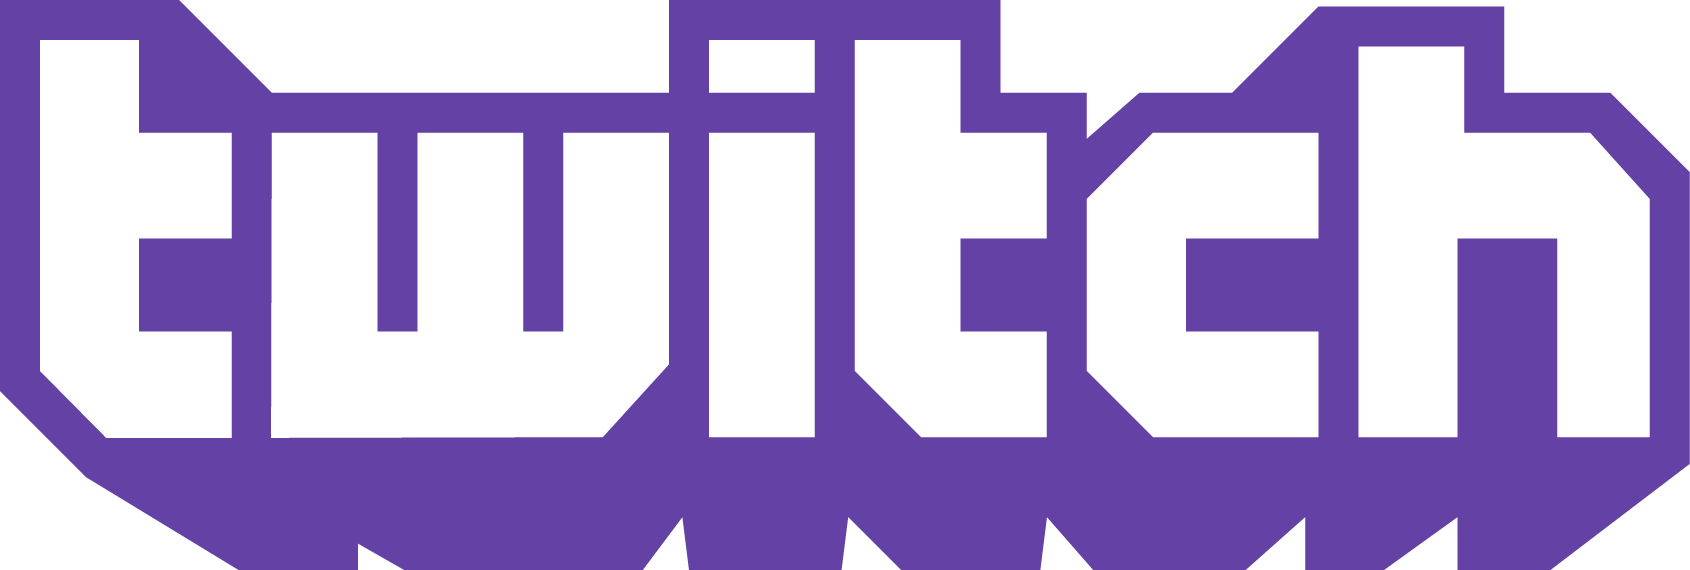 Twitch Logo Eps PNG - 101248